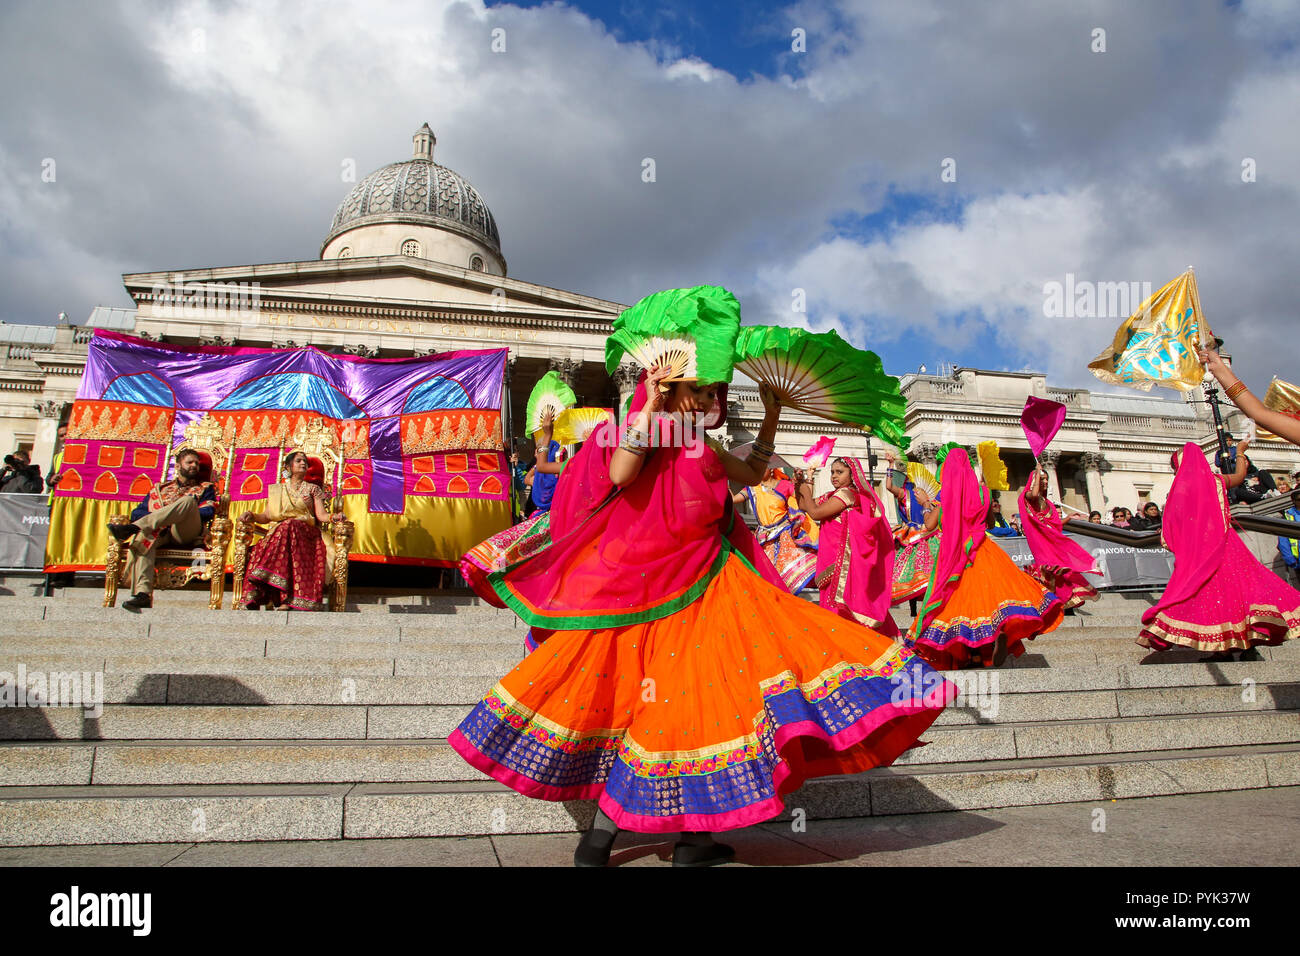 Trafalgar Square, London, UK. 28 Oct 2018 - Performers during the Mass Ghoomar Dance - a traditional Gujarati folk dance of the Bhil tribe performed in worship to Goddess Sarasvati, were the dancers twirling in and out of a wide circle.  Hundreds of Hindus, Sikhs, Jains and people from all communities attend Diwali celebrations in London - festival of light, Diwali in London is celebrated each year with a free concert of traditional religious and contemporary Asian music and dance.  Credit: Dinendra Haria/Alamy Live News Stock Photo